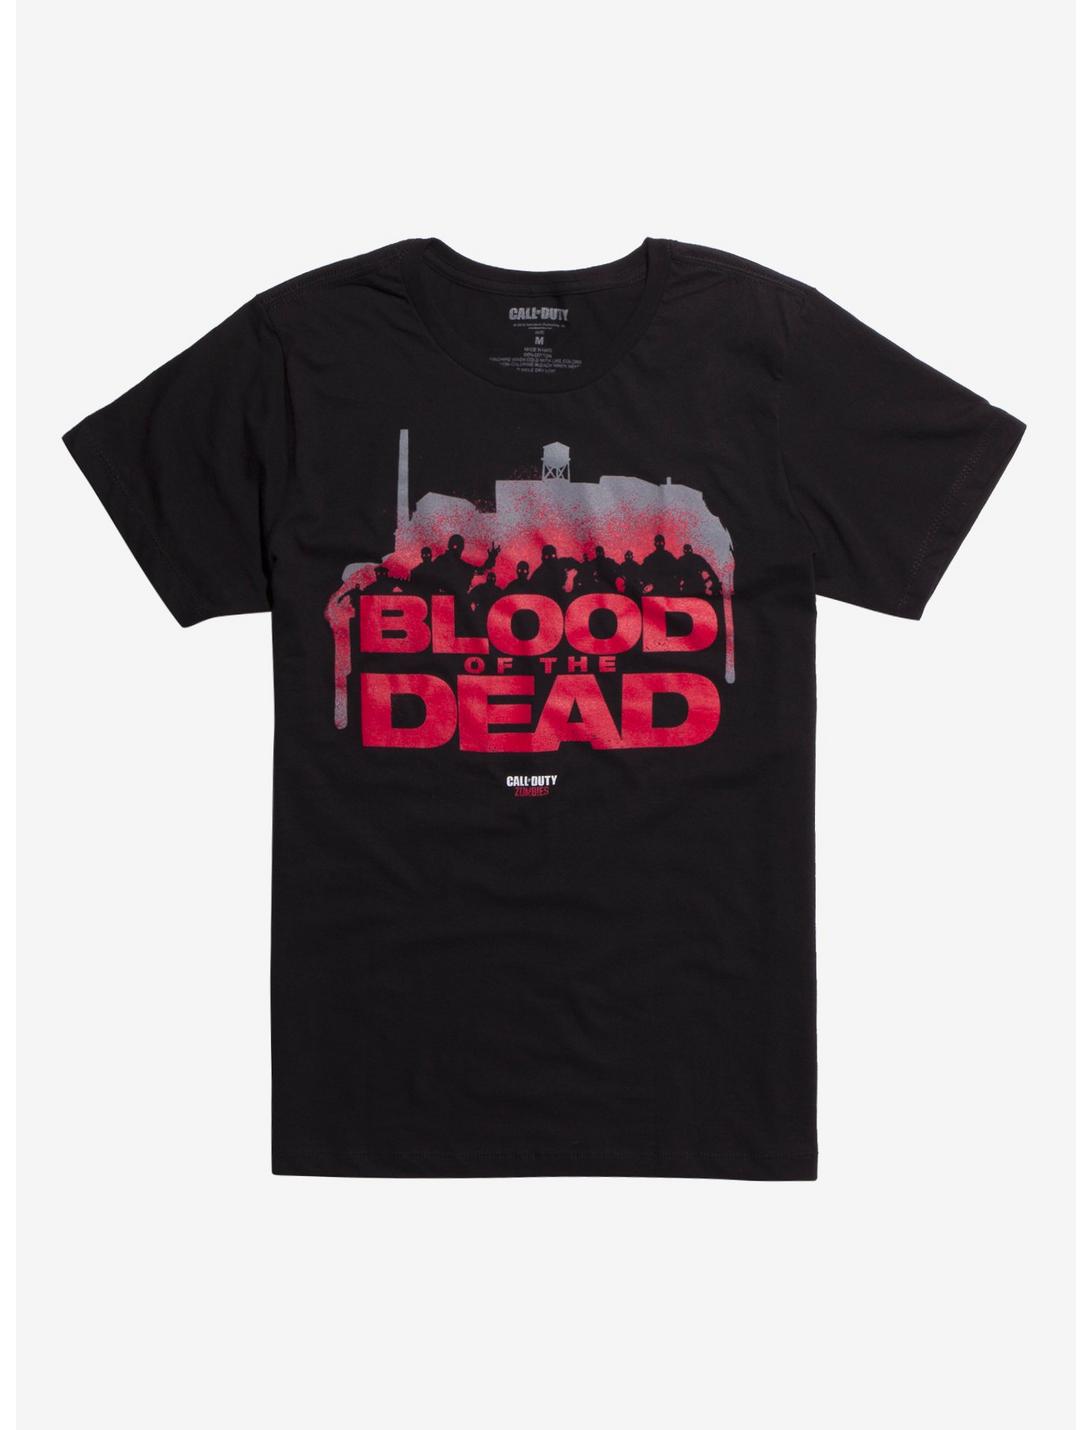 Call Of Duty Blood Of The Dead Teaser T-Shirt Hot Topic Exclusive, BLACK, hi-res